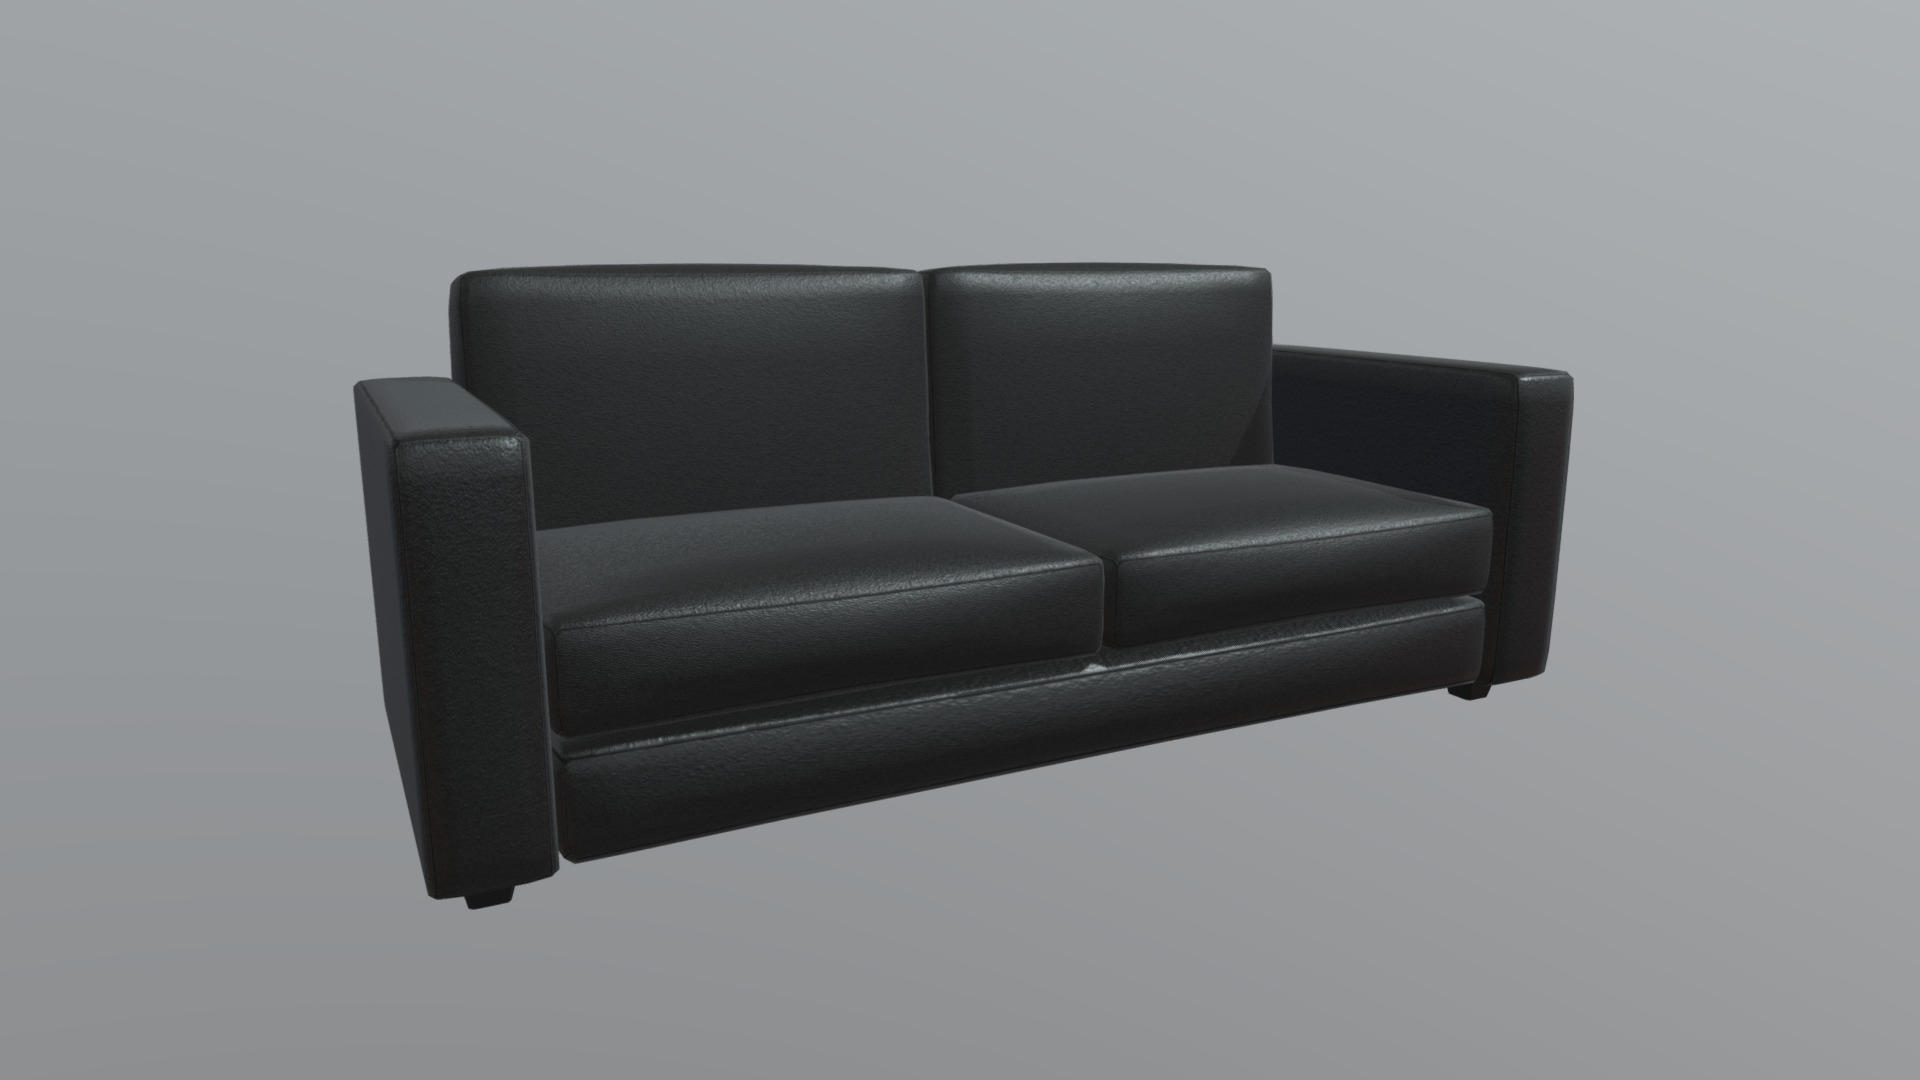 3D model Sofa 2 - This is a 3D model of the Sofa 2. The 3D model is about a black leather couch.